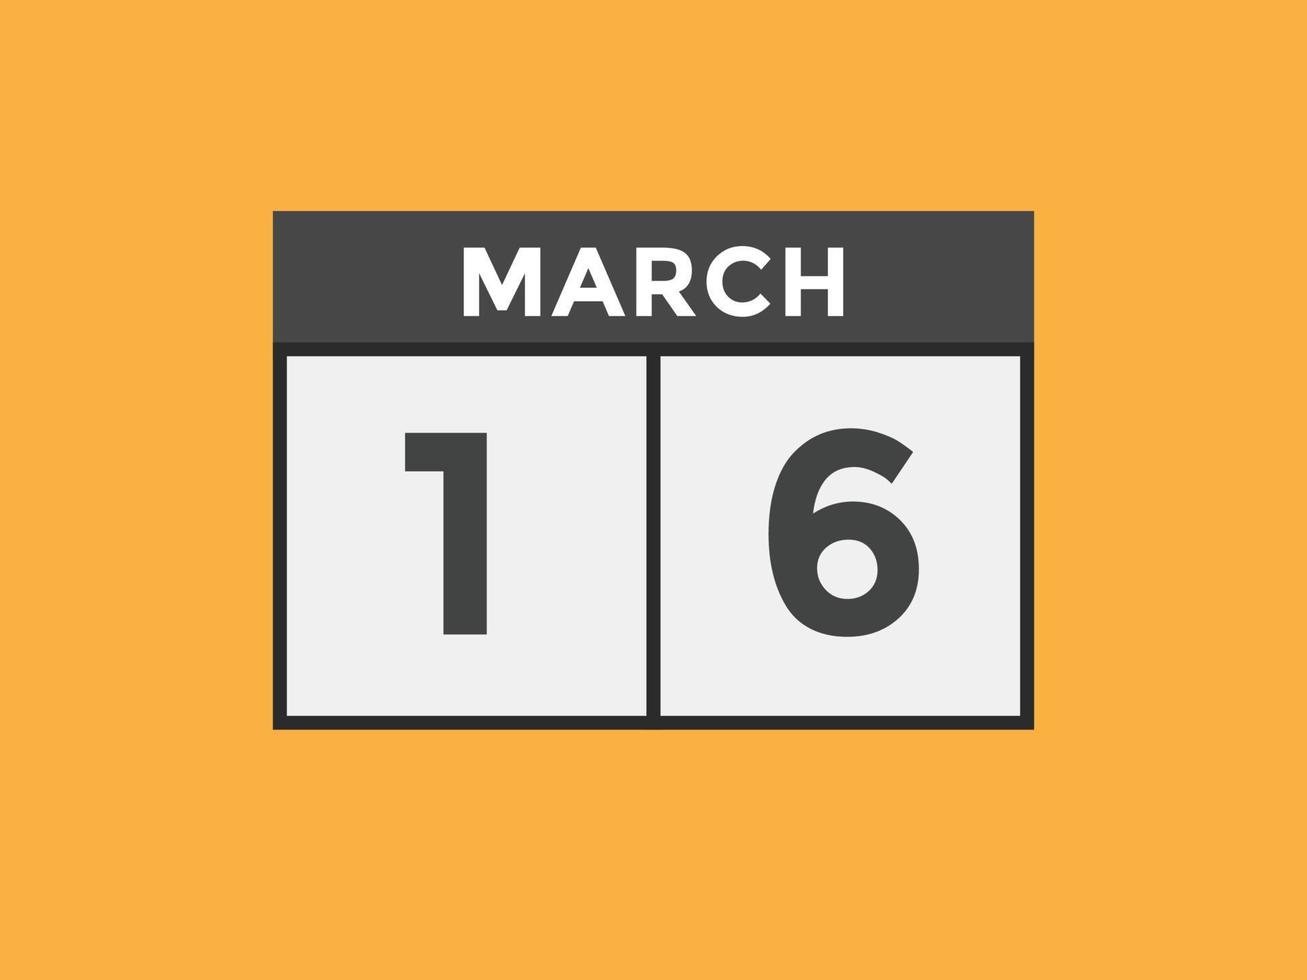 march 16 calendar reminder. 16th march daily calendar icon template. Calendar 16th march icon Design template. Vector illustration